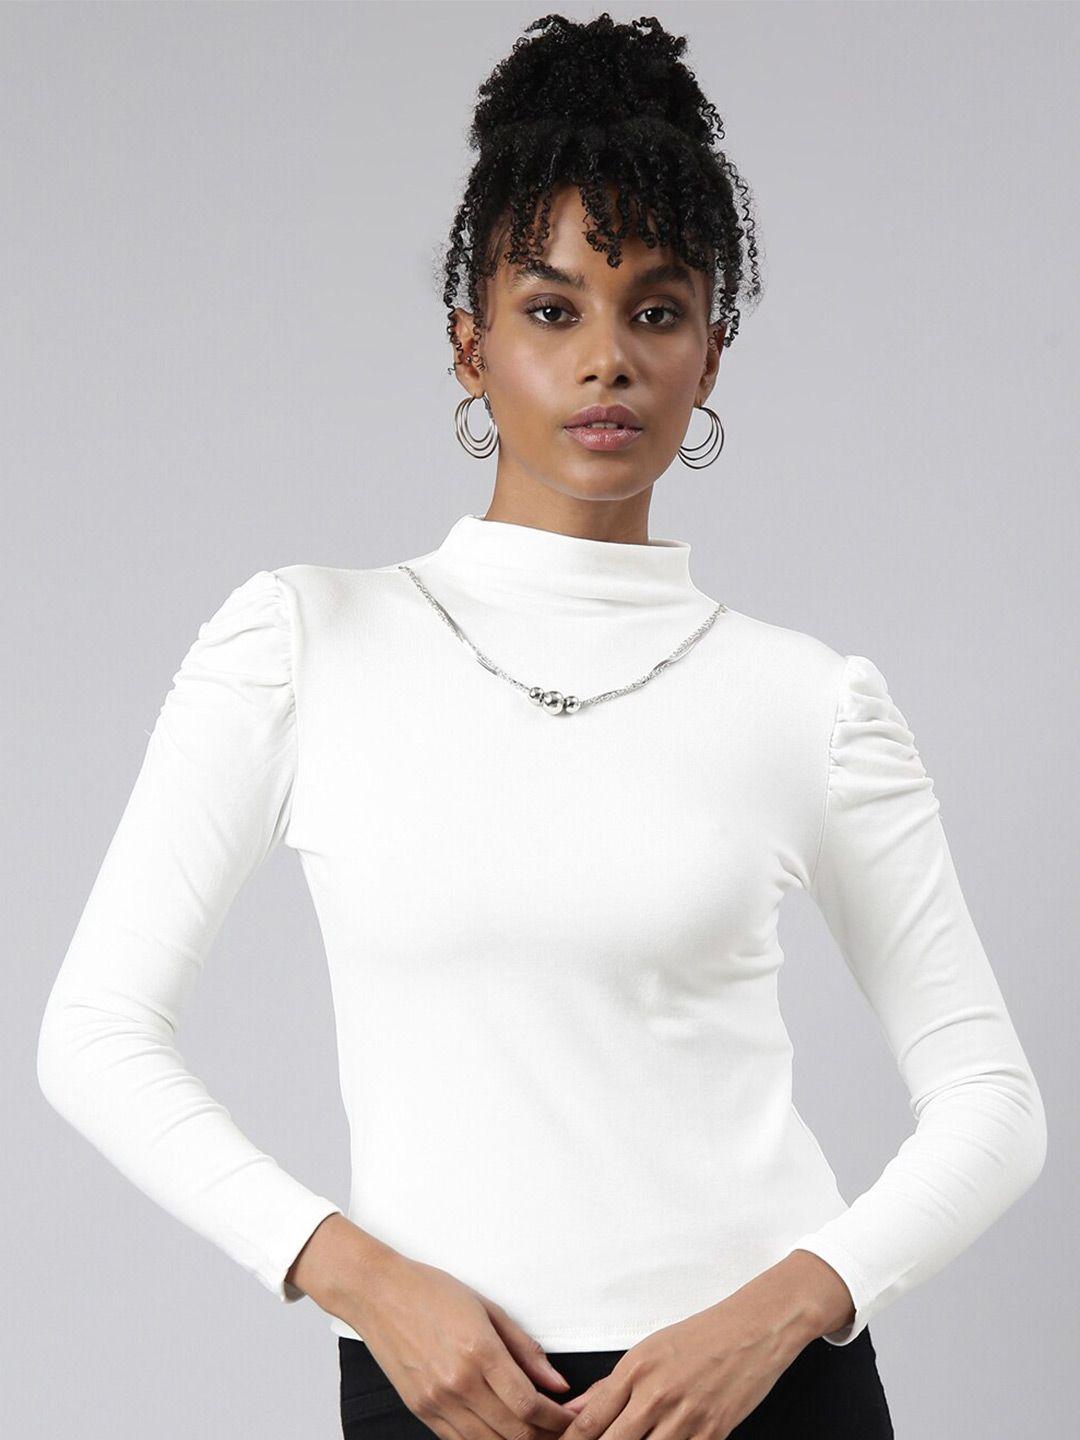 showoff-high-neck-long-sleeves-top-comes-with-chain